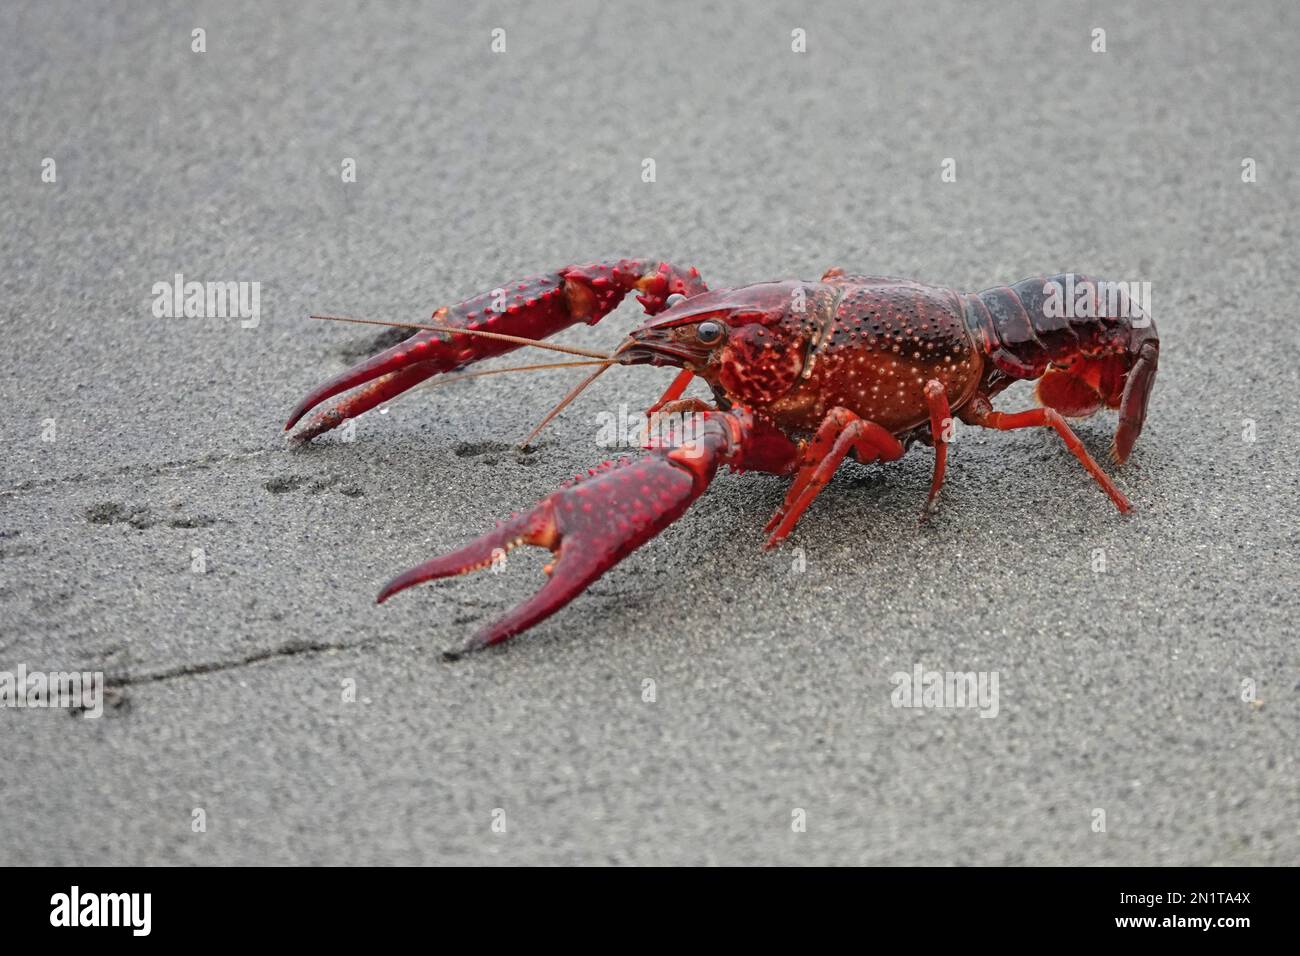 A red swamp crayfish, resembling a small lobster, is shown on the shore of a lake on São Miguel island of the Azores, Portugal. Stock Photo